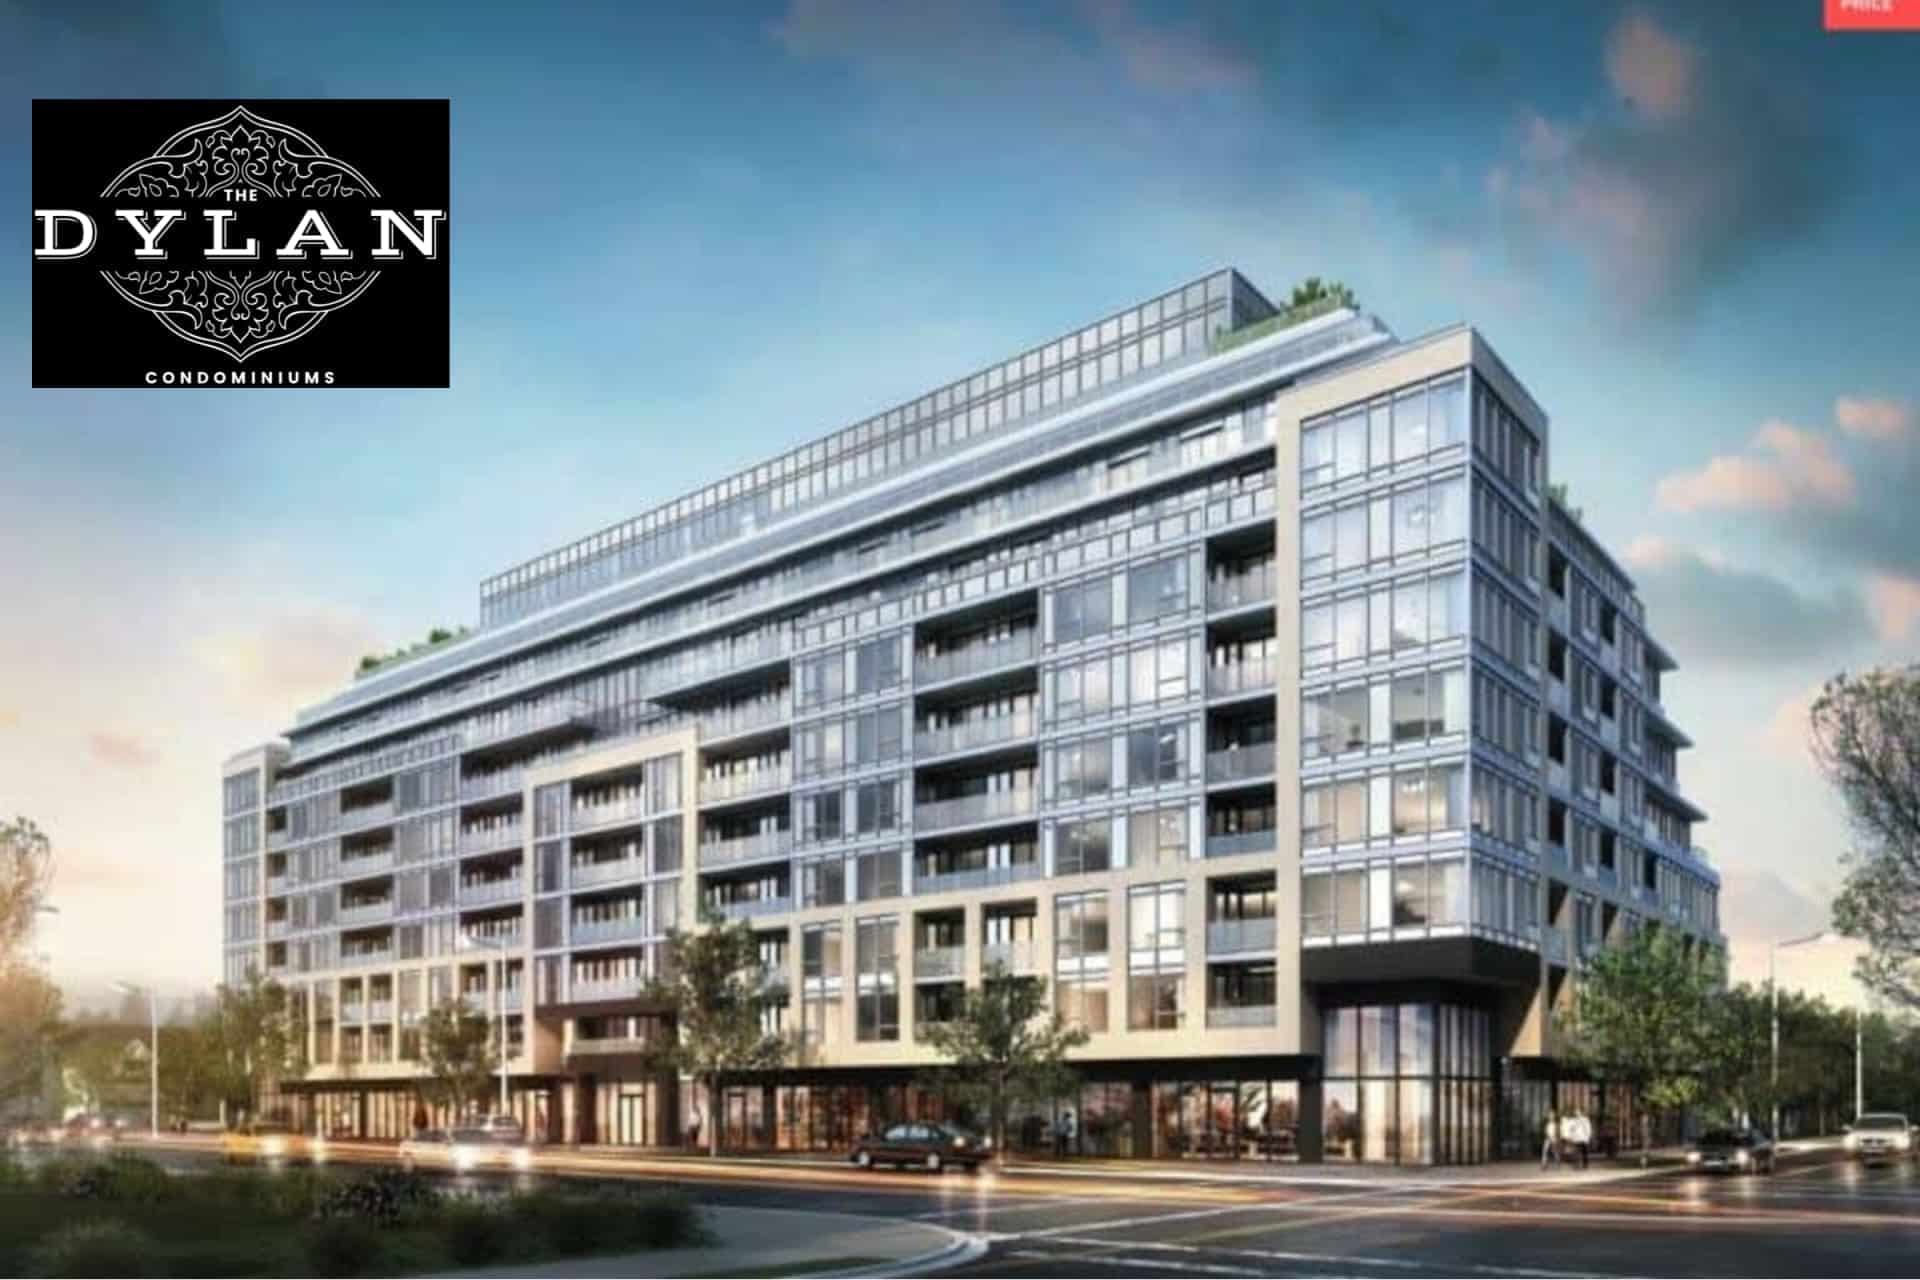 The Dylan Condominiums Register Now for First Access